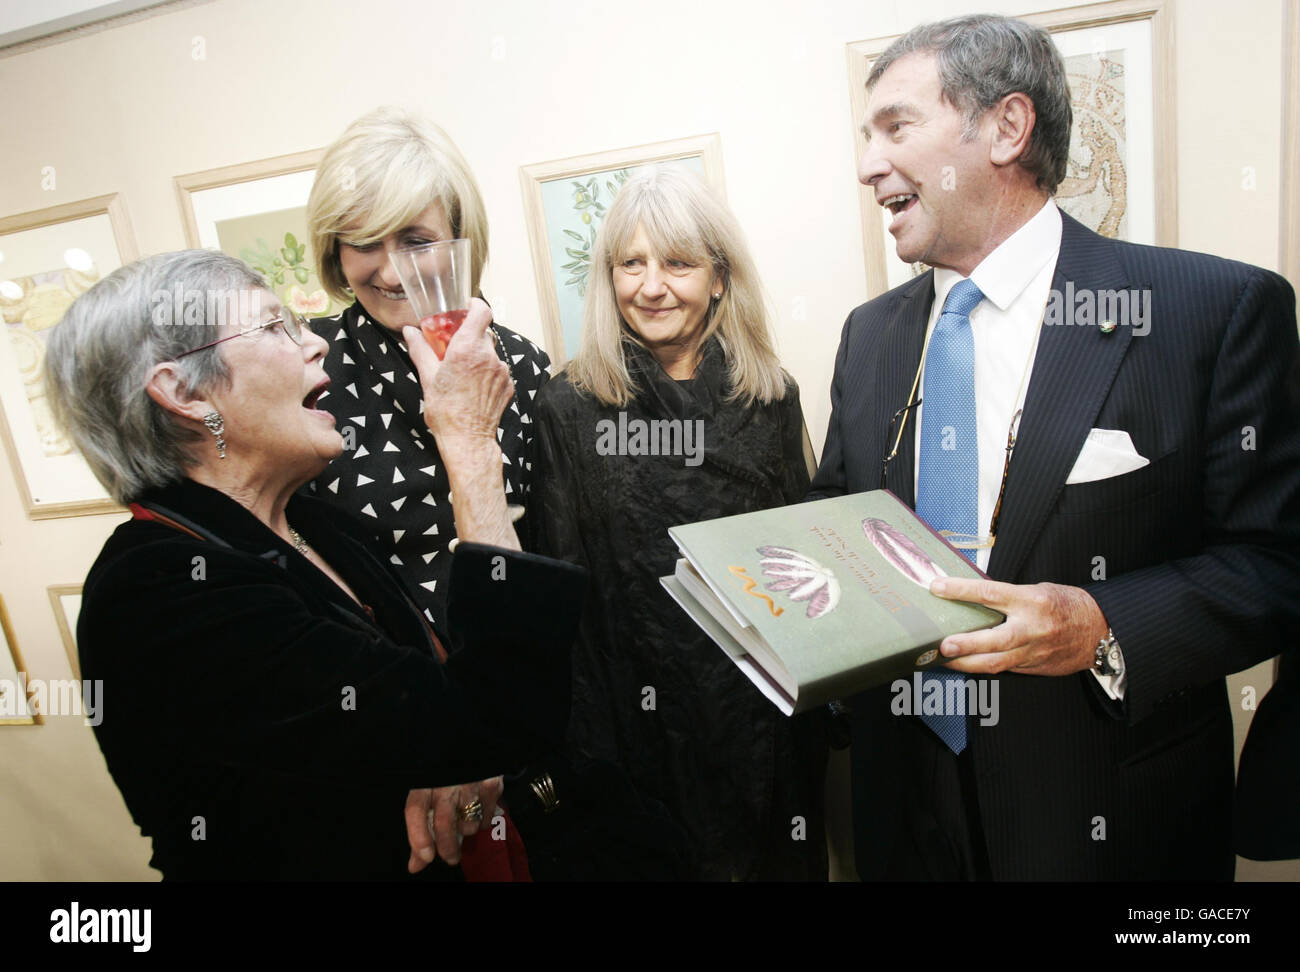 (left to right) Anna Del Conte author, Claire Blampied MD Sacla UK, Val Archer artist and Lorenzo Ercoly President Sacla UK at the launch of new culinary travelogue 'The Painter, the Cook & the Art of Cucina' in Chris Beetles Gallery, Mayfair, London. Stock Photo